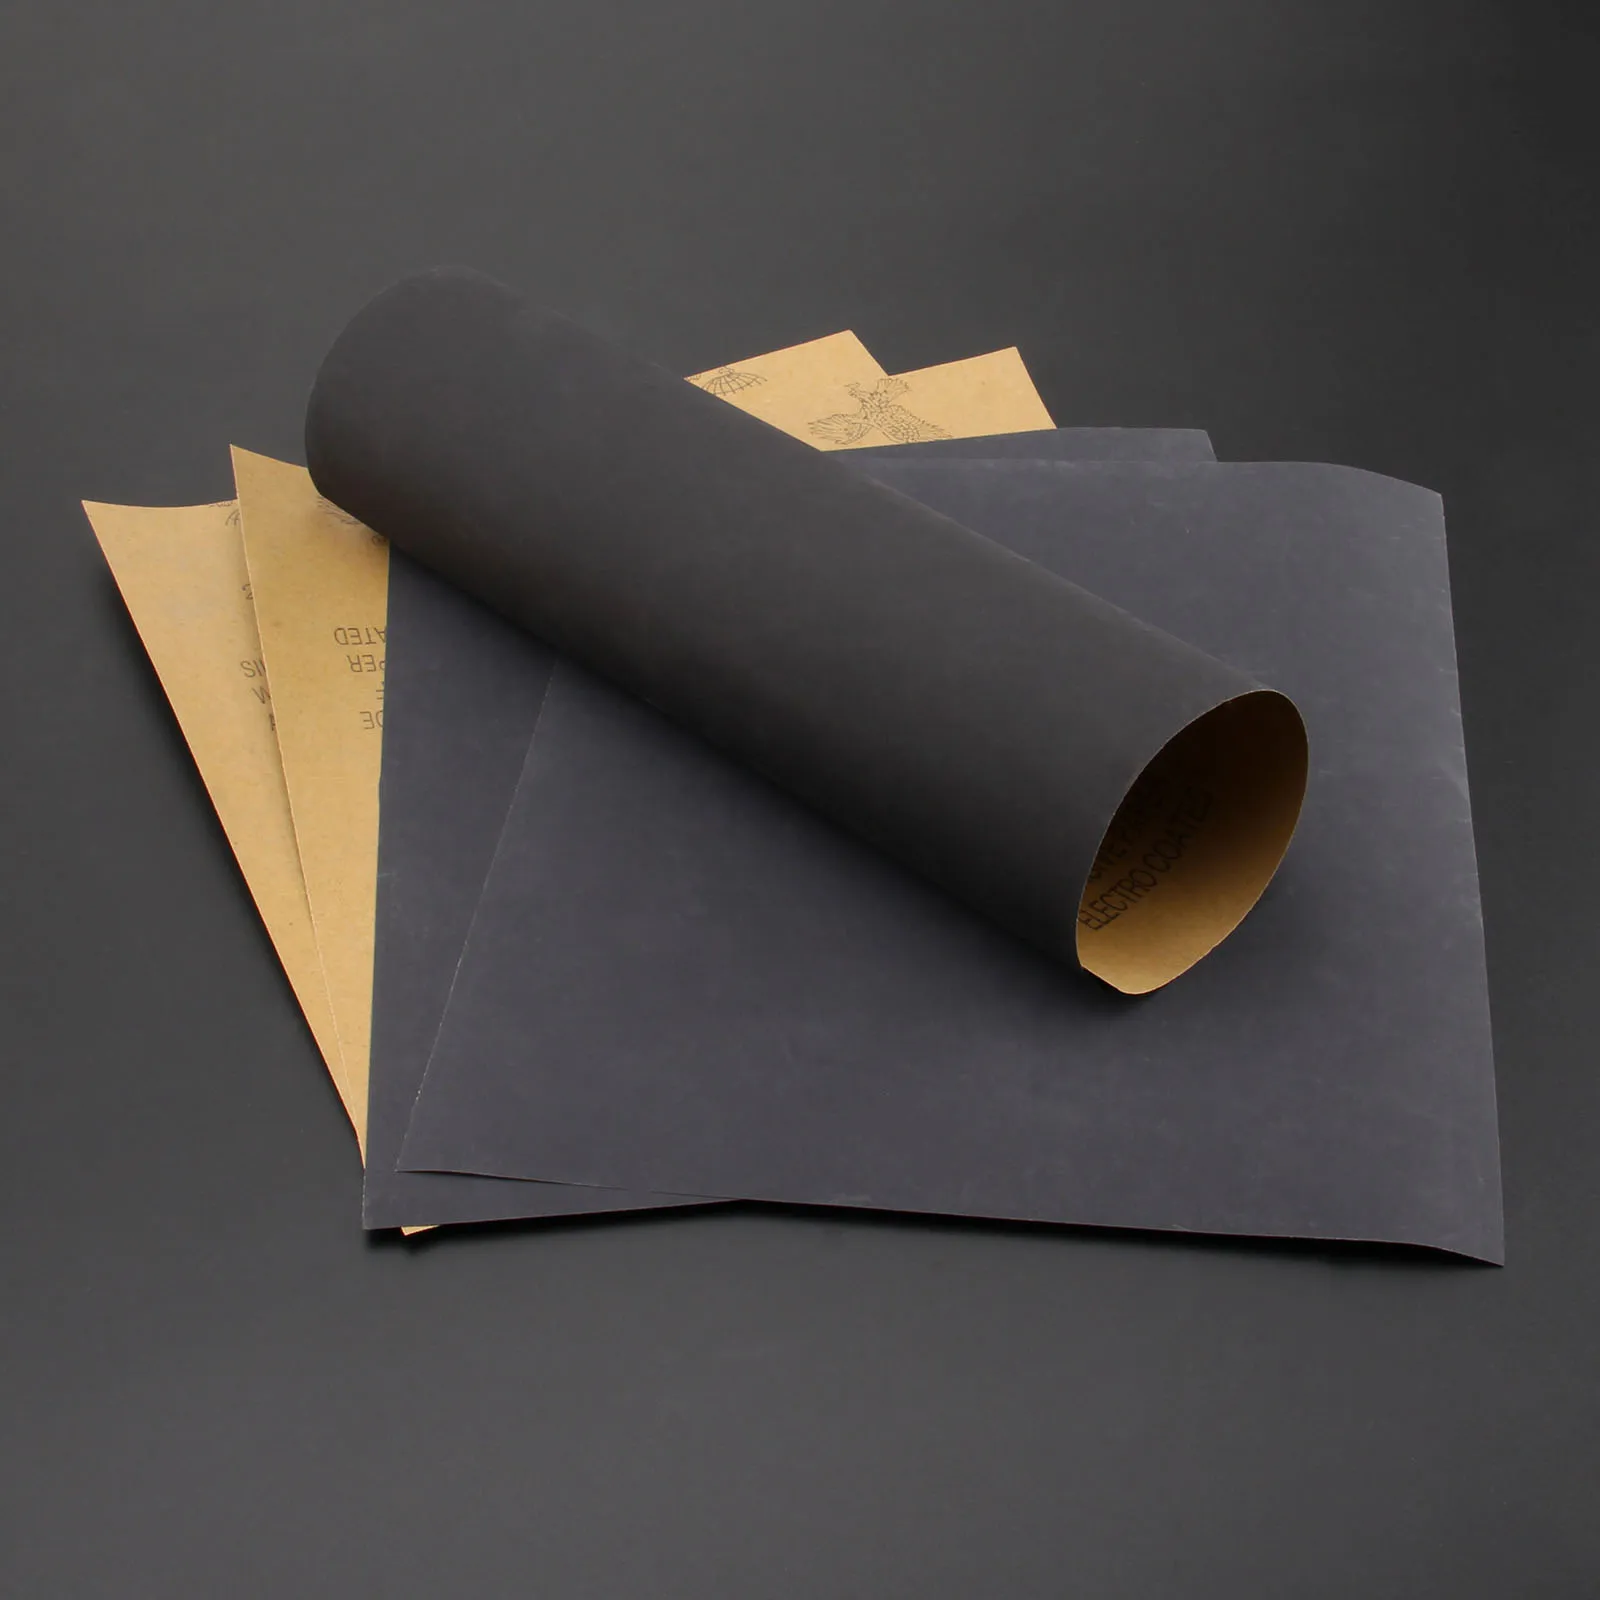 

5pcs 28 x 23cm Sandpaper Waterproof Abrasive Paper Sand Paper Silicone Carbide Polishing Grinding Wet/dry Tool 2000 Grit